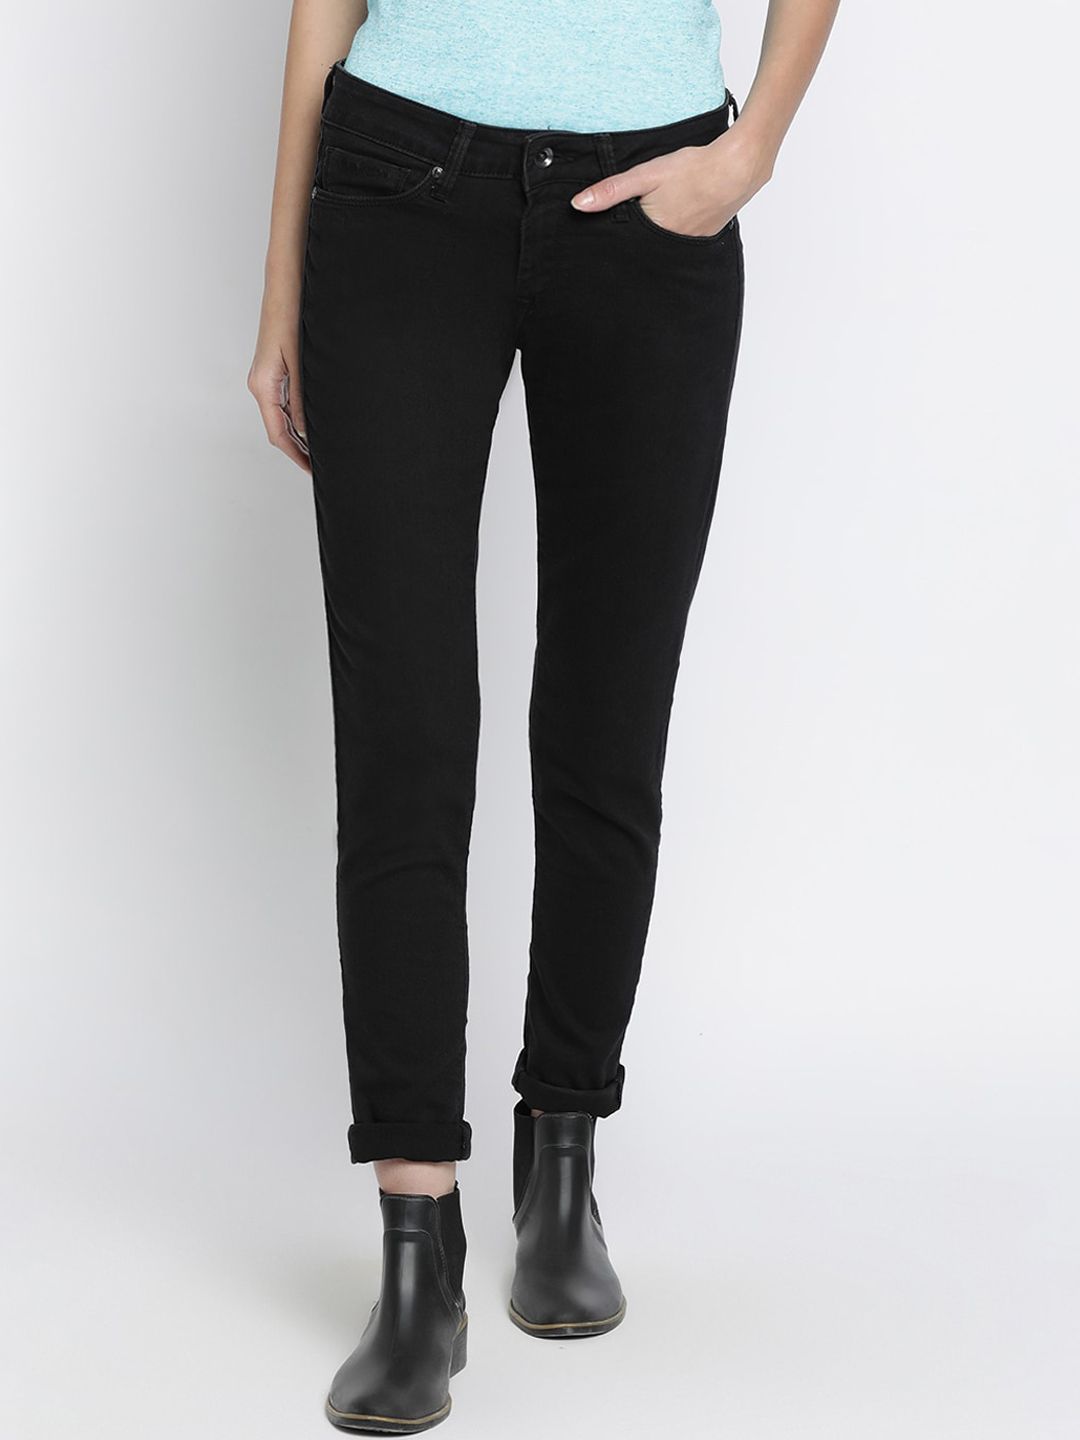 Pepe Jeans Women Black Solid Jeans Price in India